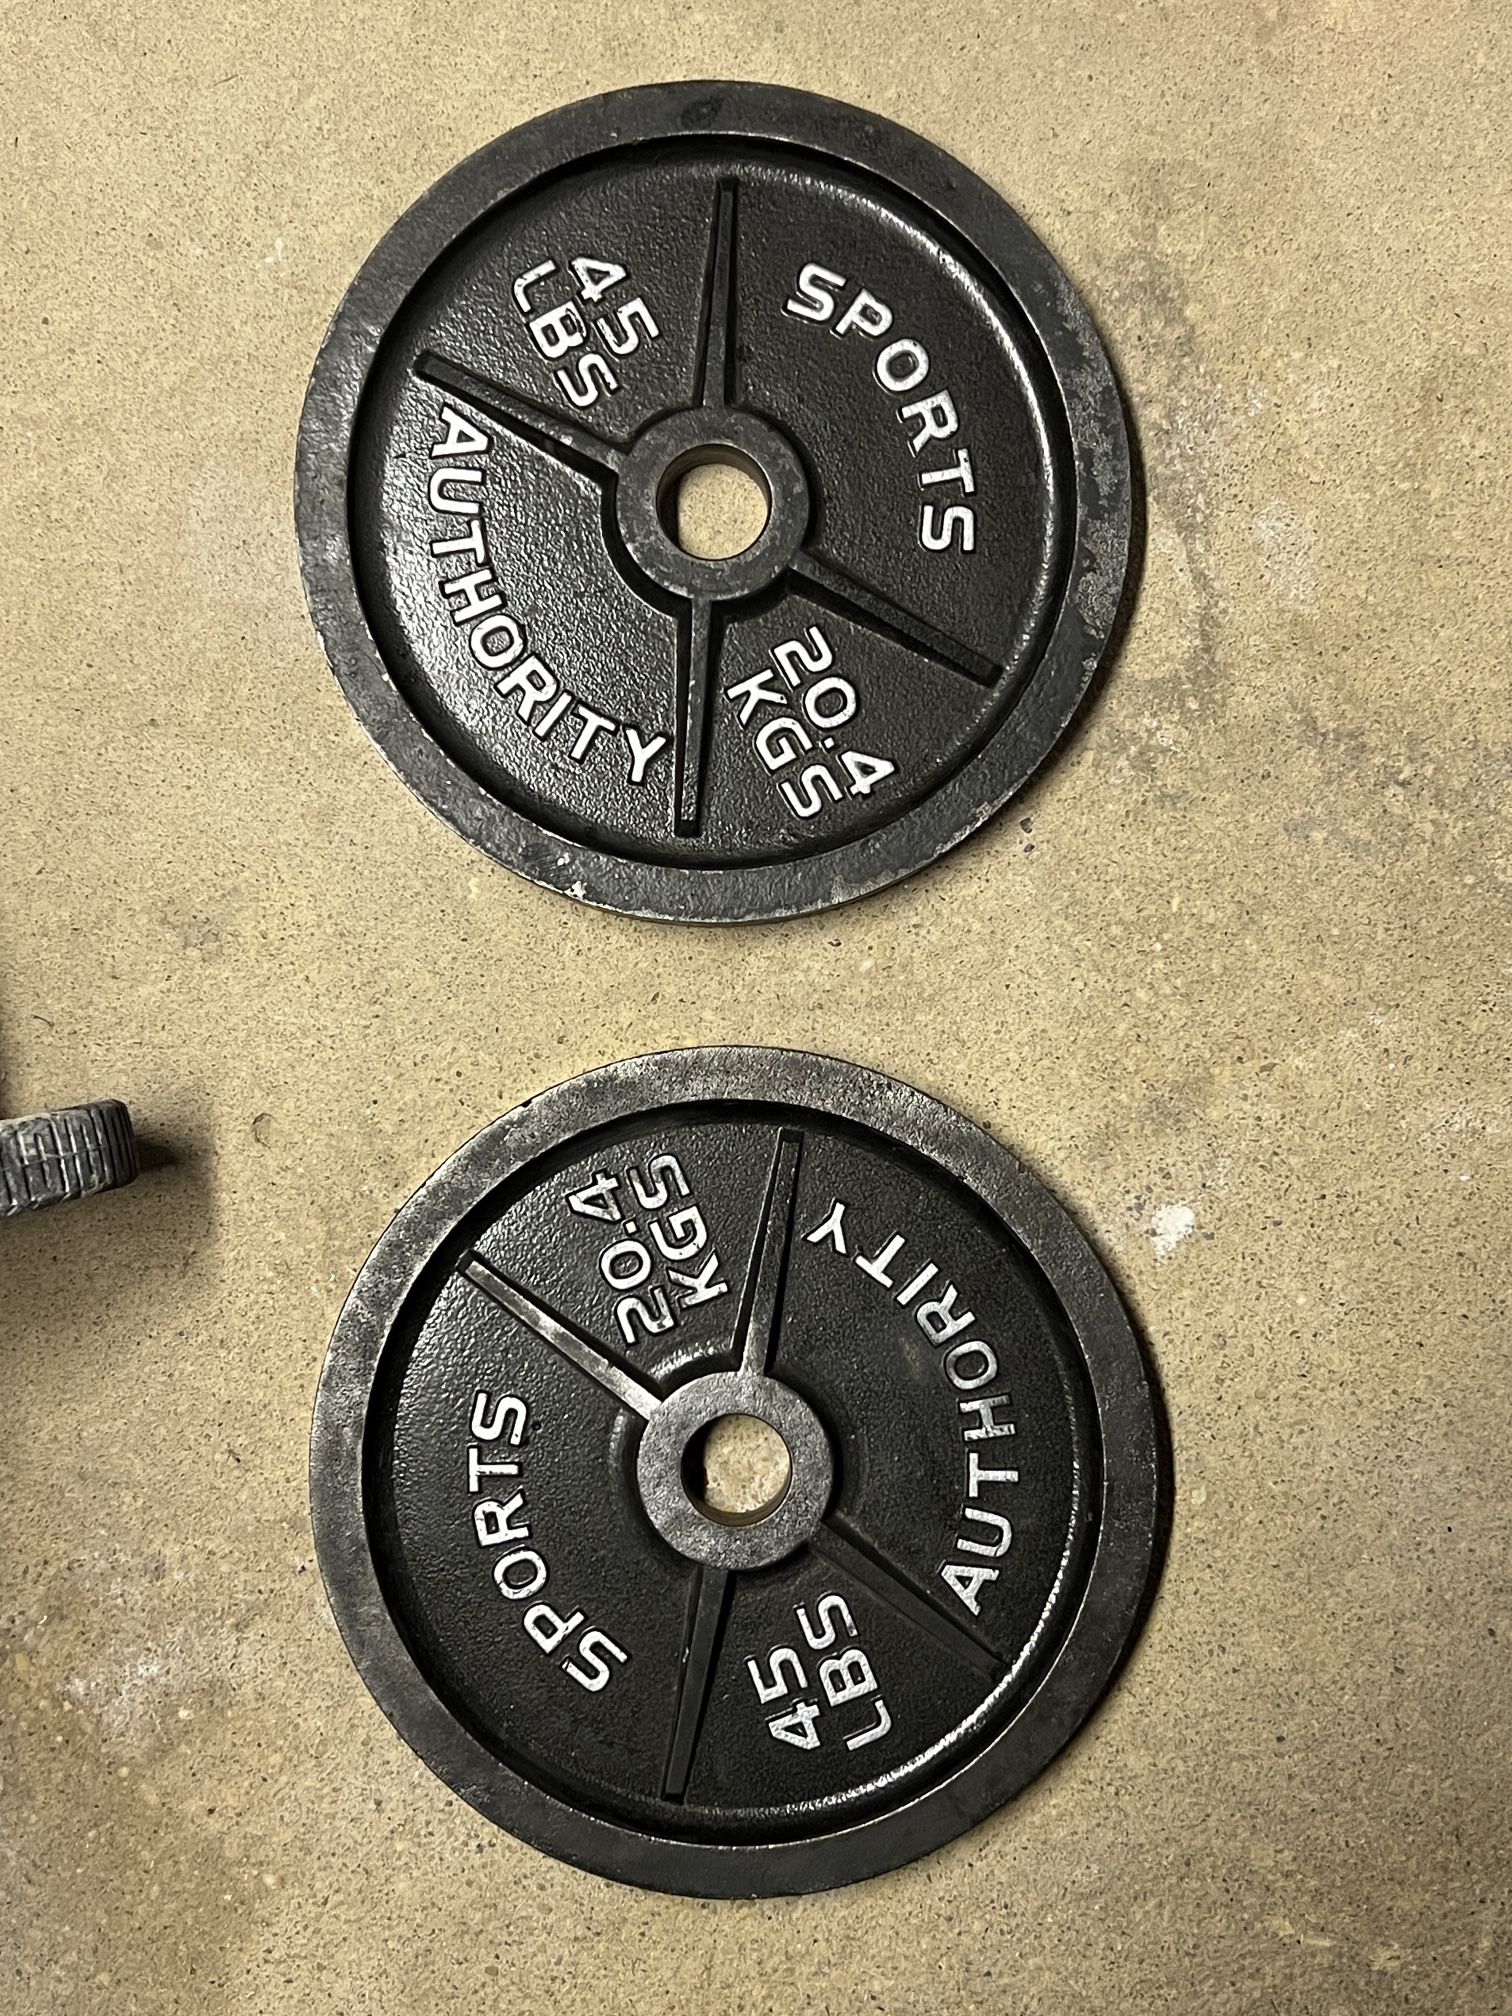 45lbs barbell weights